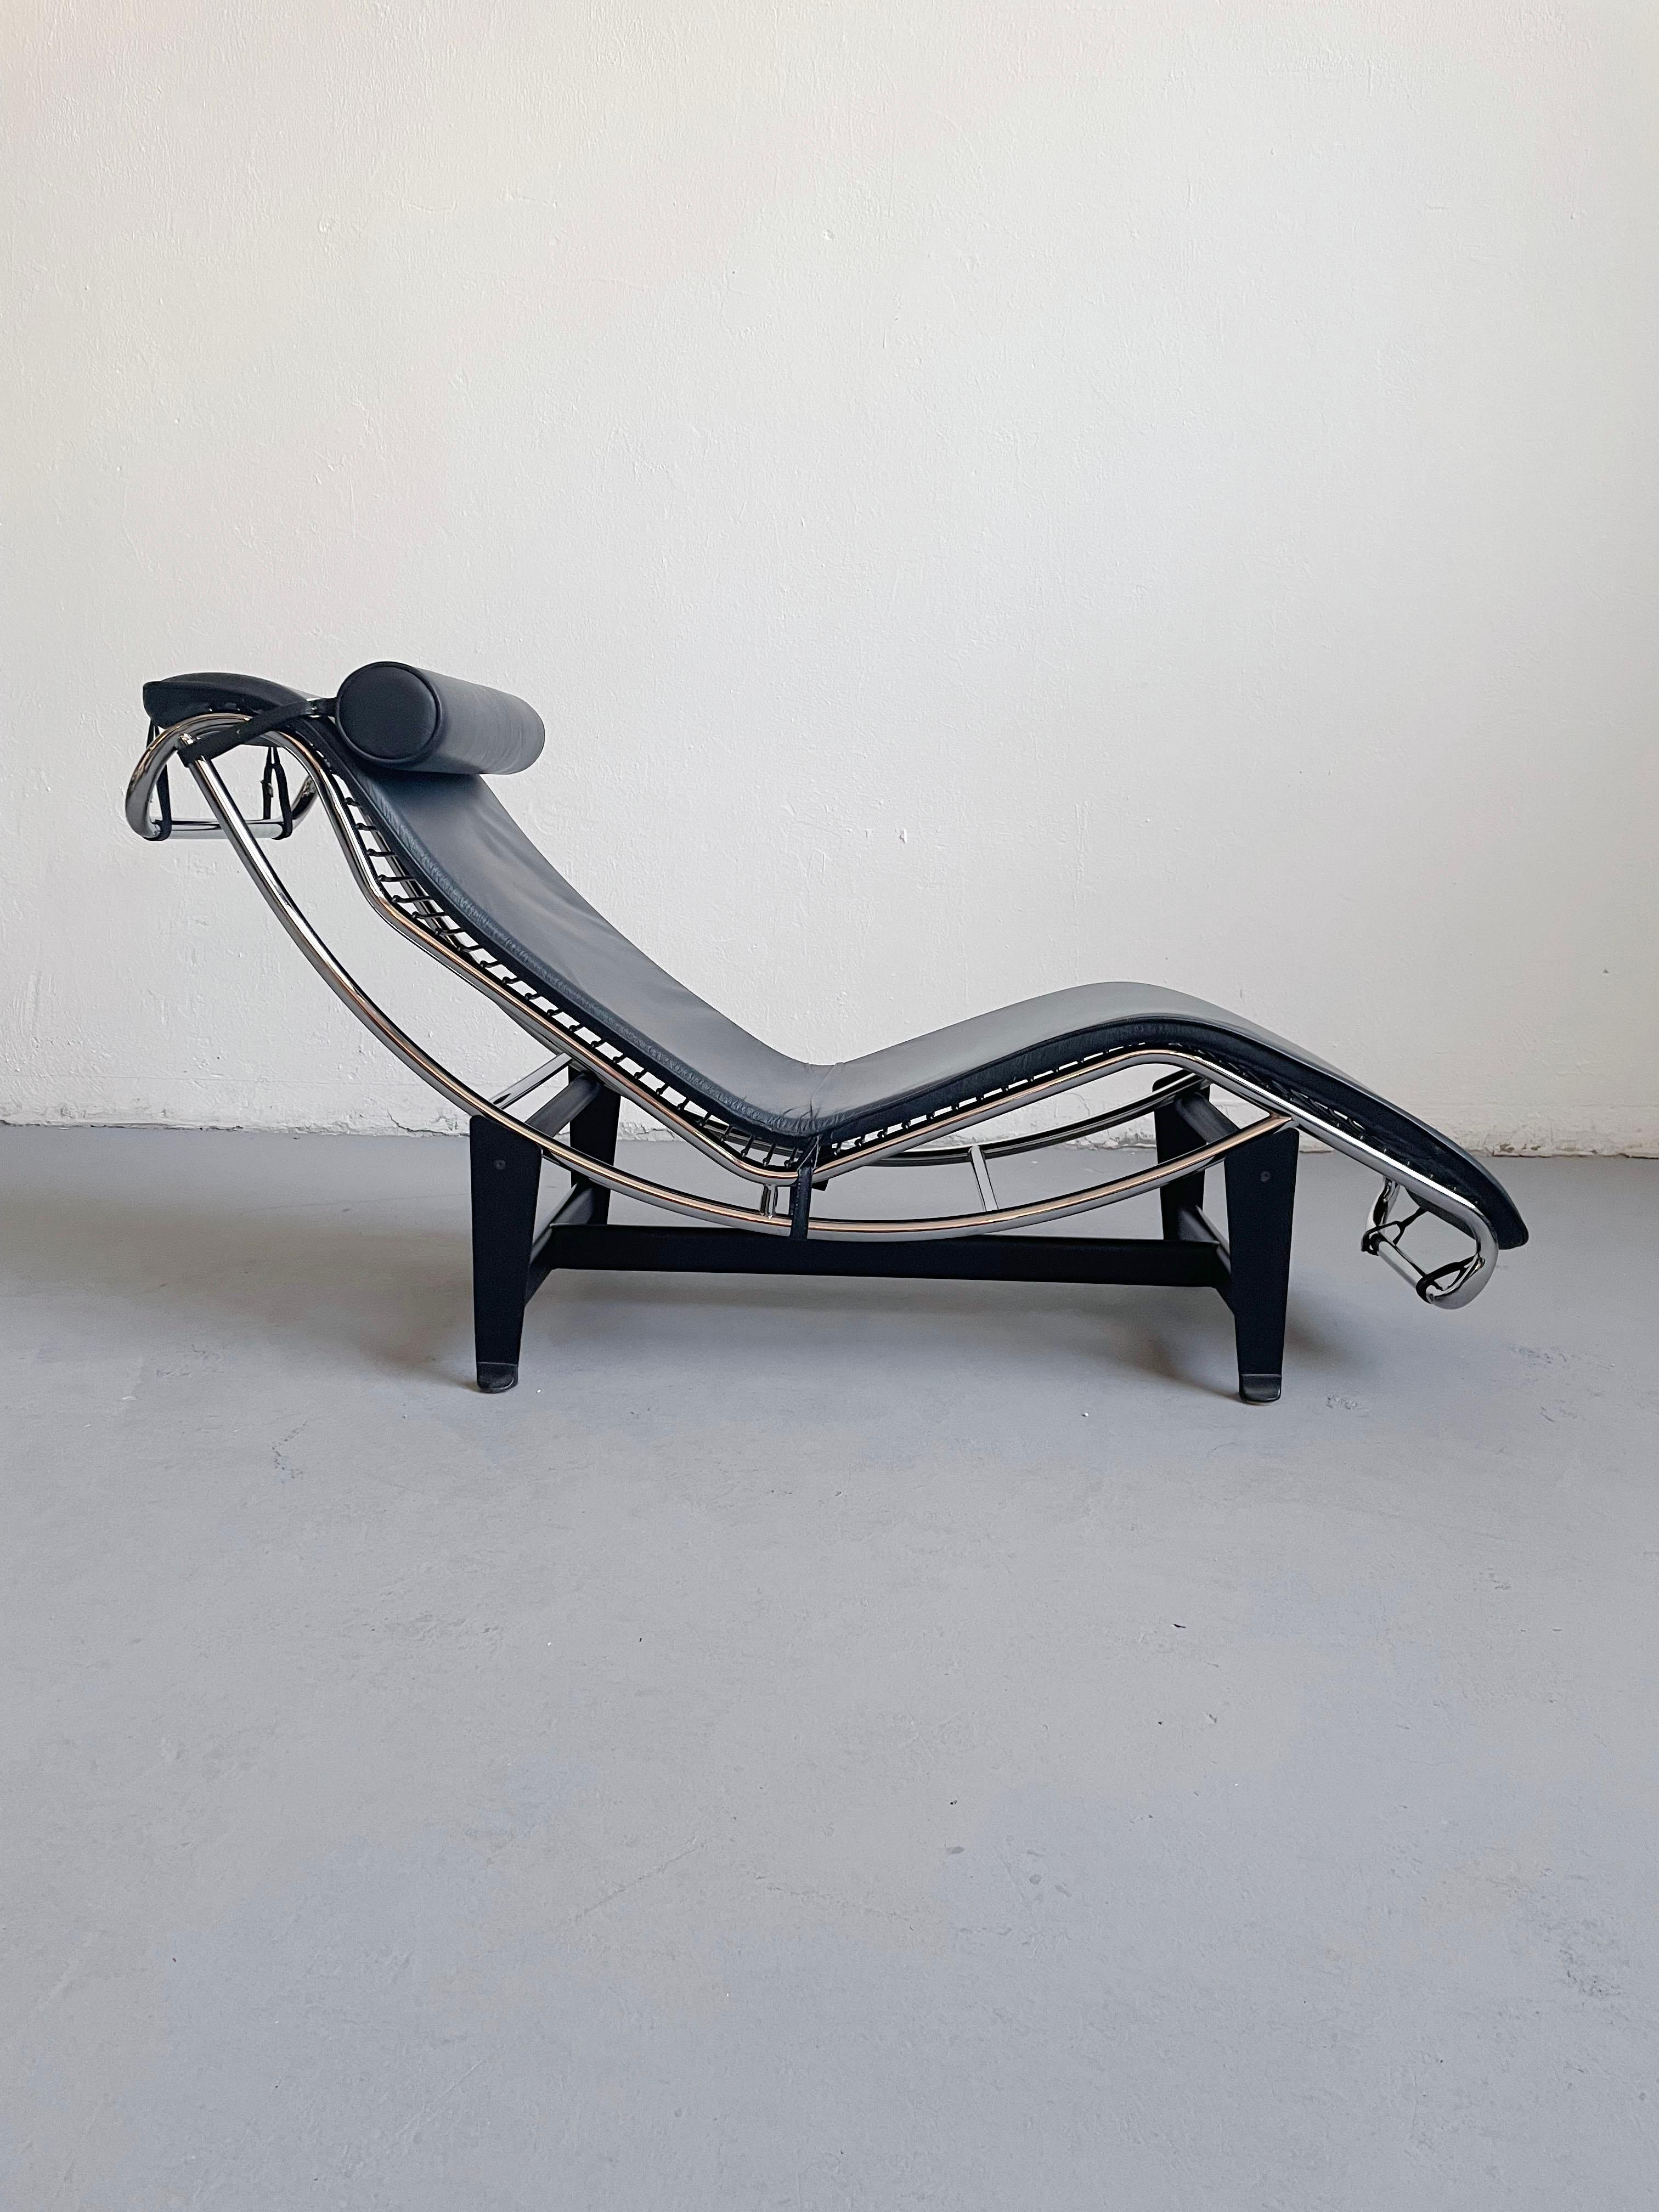 Vintage iconic Bauhaus LC4 lounge chair made in Italy in the 1990s. 

High-end production, top-quality black leather

Developed in 1928 by designers Le Corbusier, Charlotte Perriand, and Pierre Jeanneret as part of an avant-garde collection for